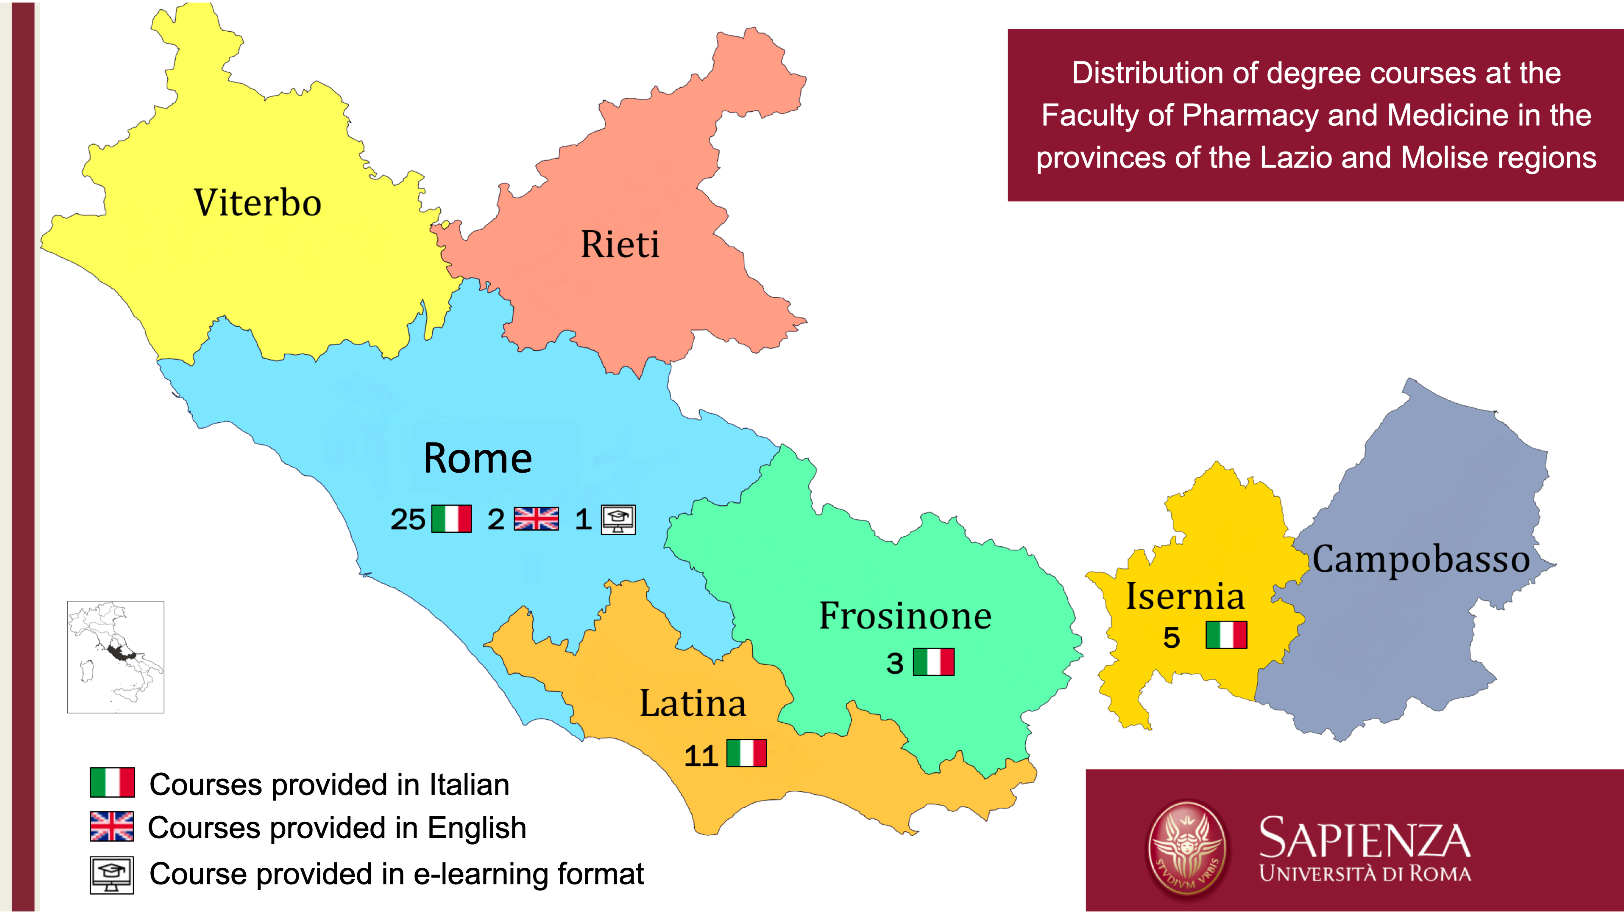 Distribution of degree courses at the Faculty of Pharmacy and Medicine in the provices of the Lazio (39 courses provided in Italian, 2 in English, 1 provide in e-learning format) and Molise Regions (5 courses in Italian)